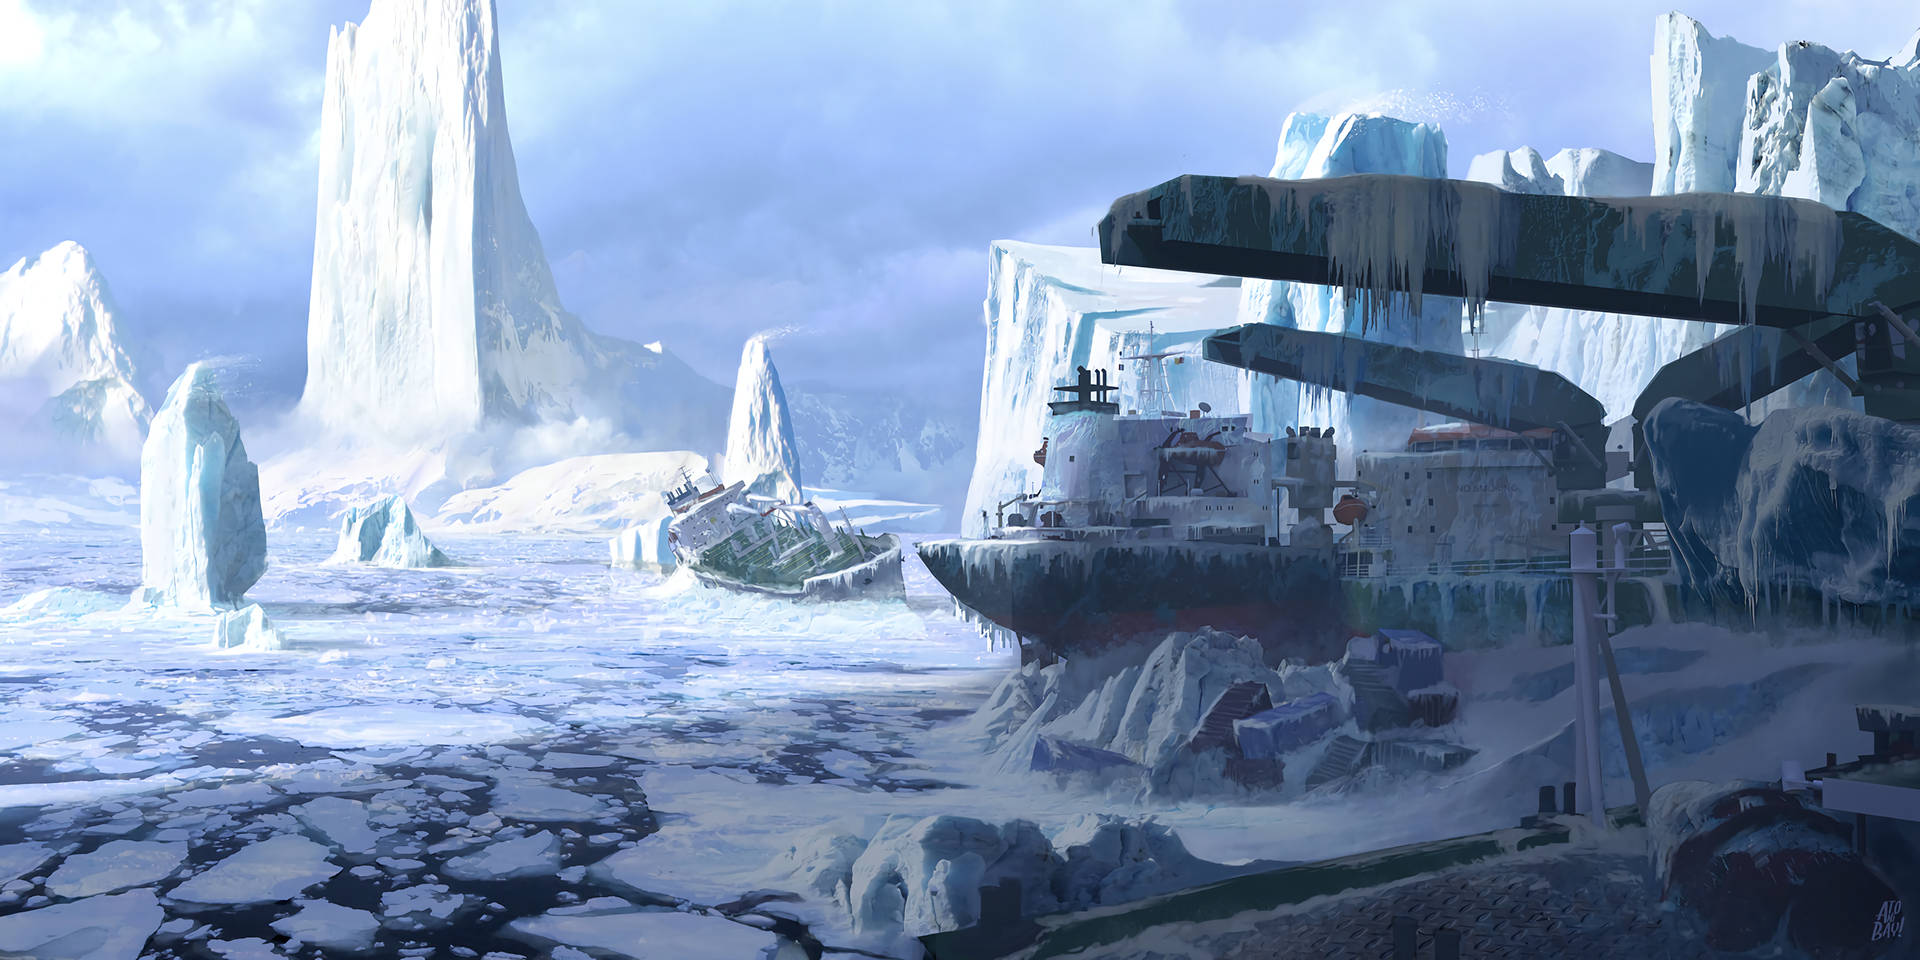 Frozen Ship Frosted Water Wallpaper